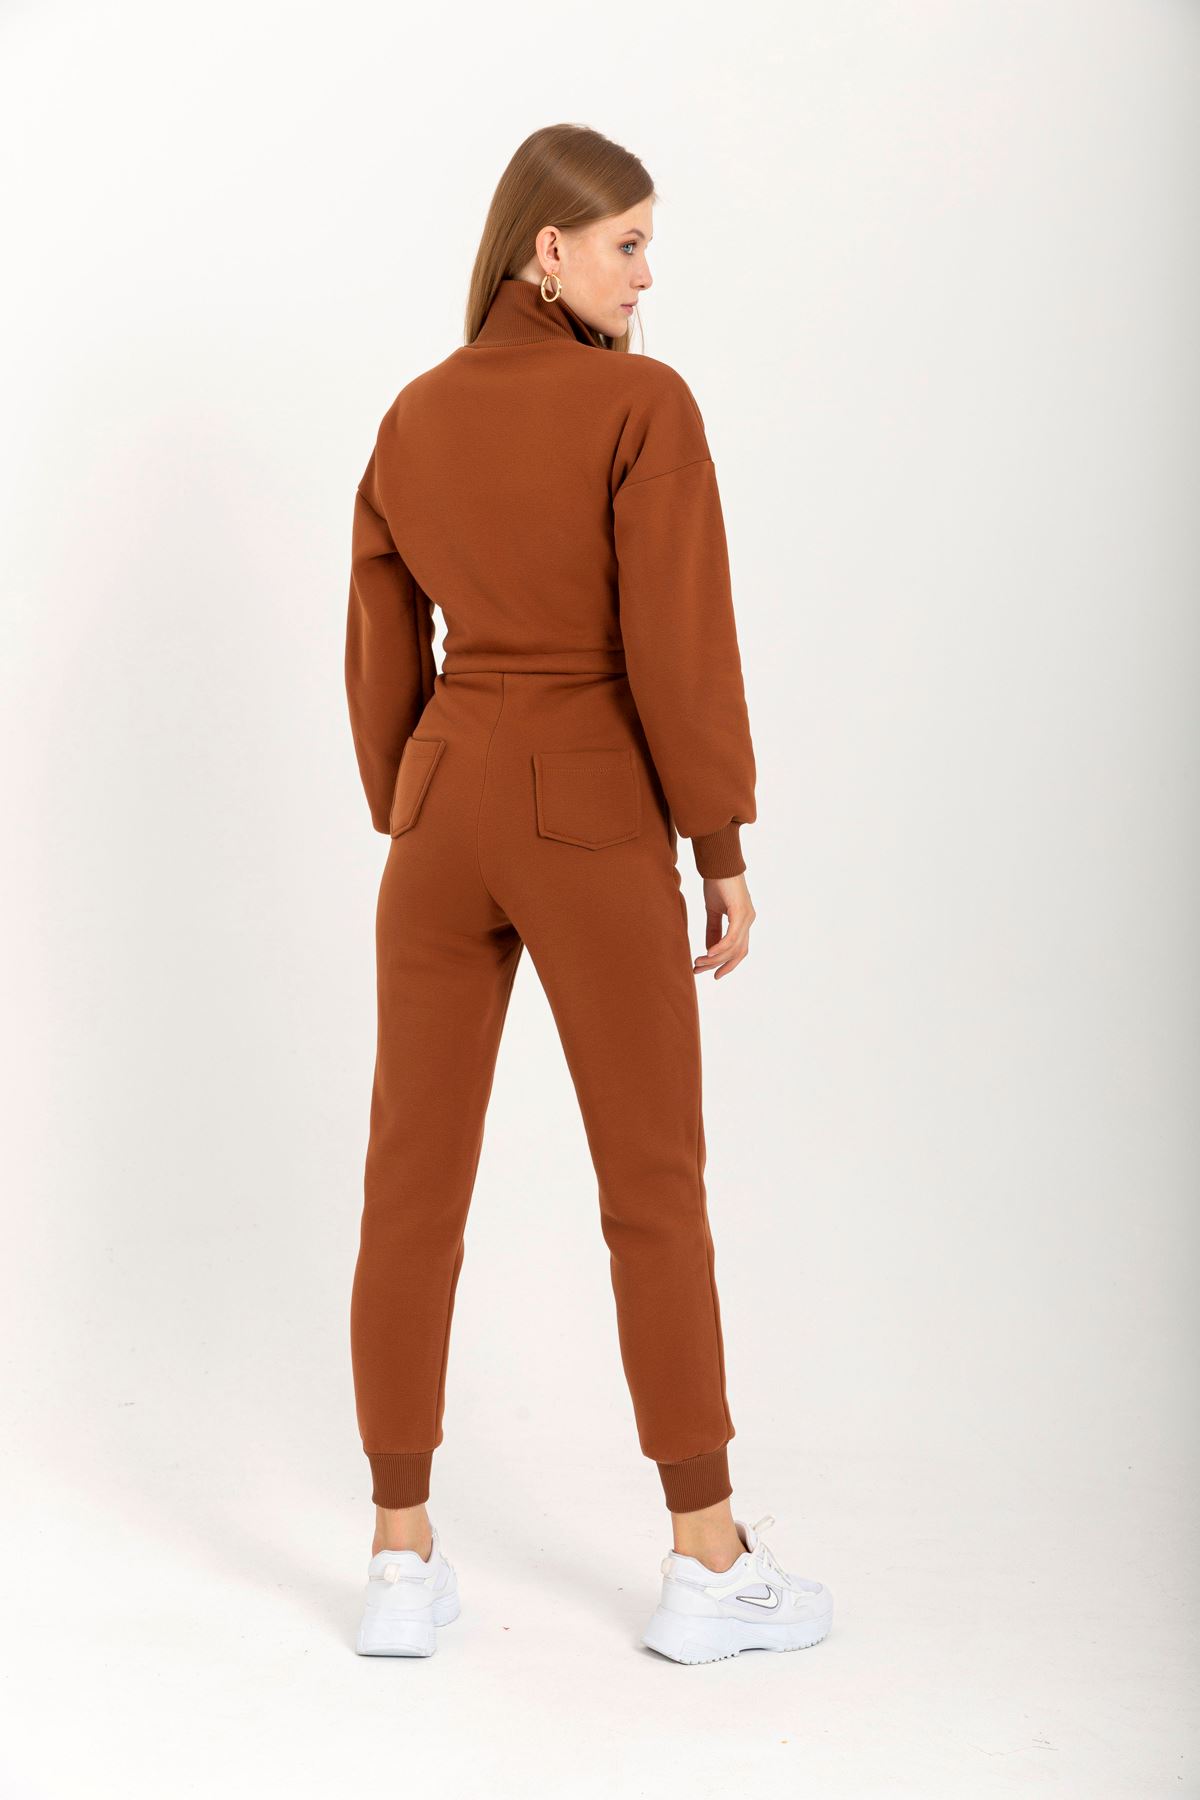 Third Knit Fabric Long Sleeve Roll Neck Tight Fit Zip Women Overalls - Brown